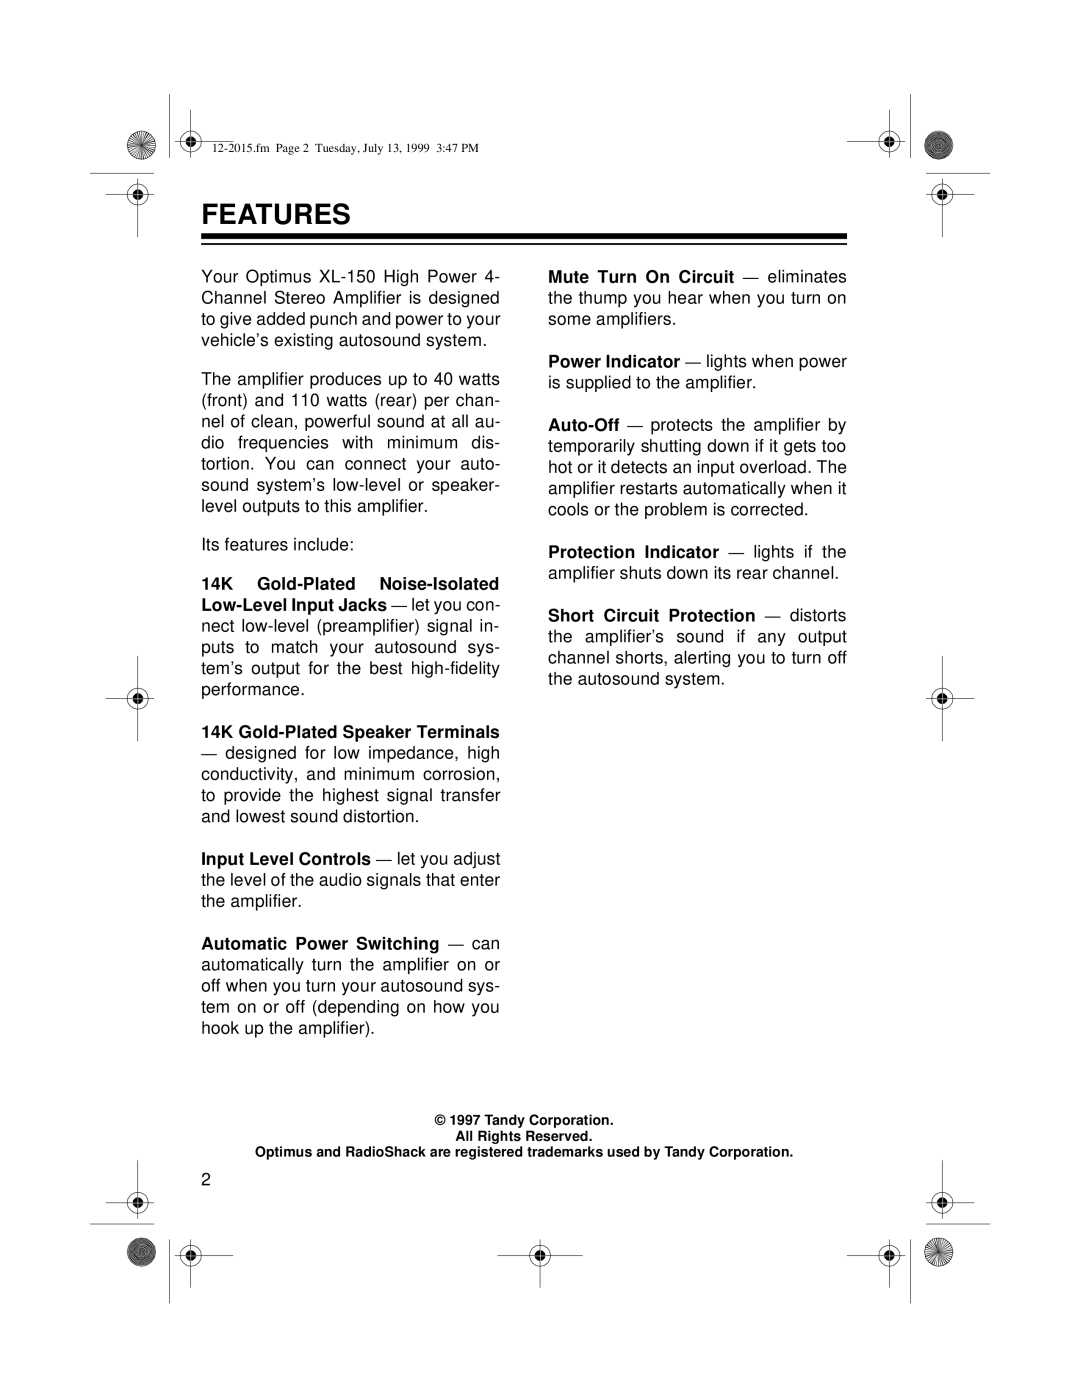 Radio Shack XL-150 owner manual Features 